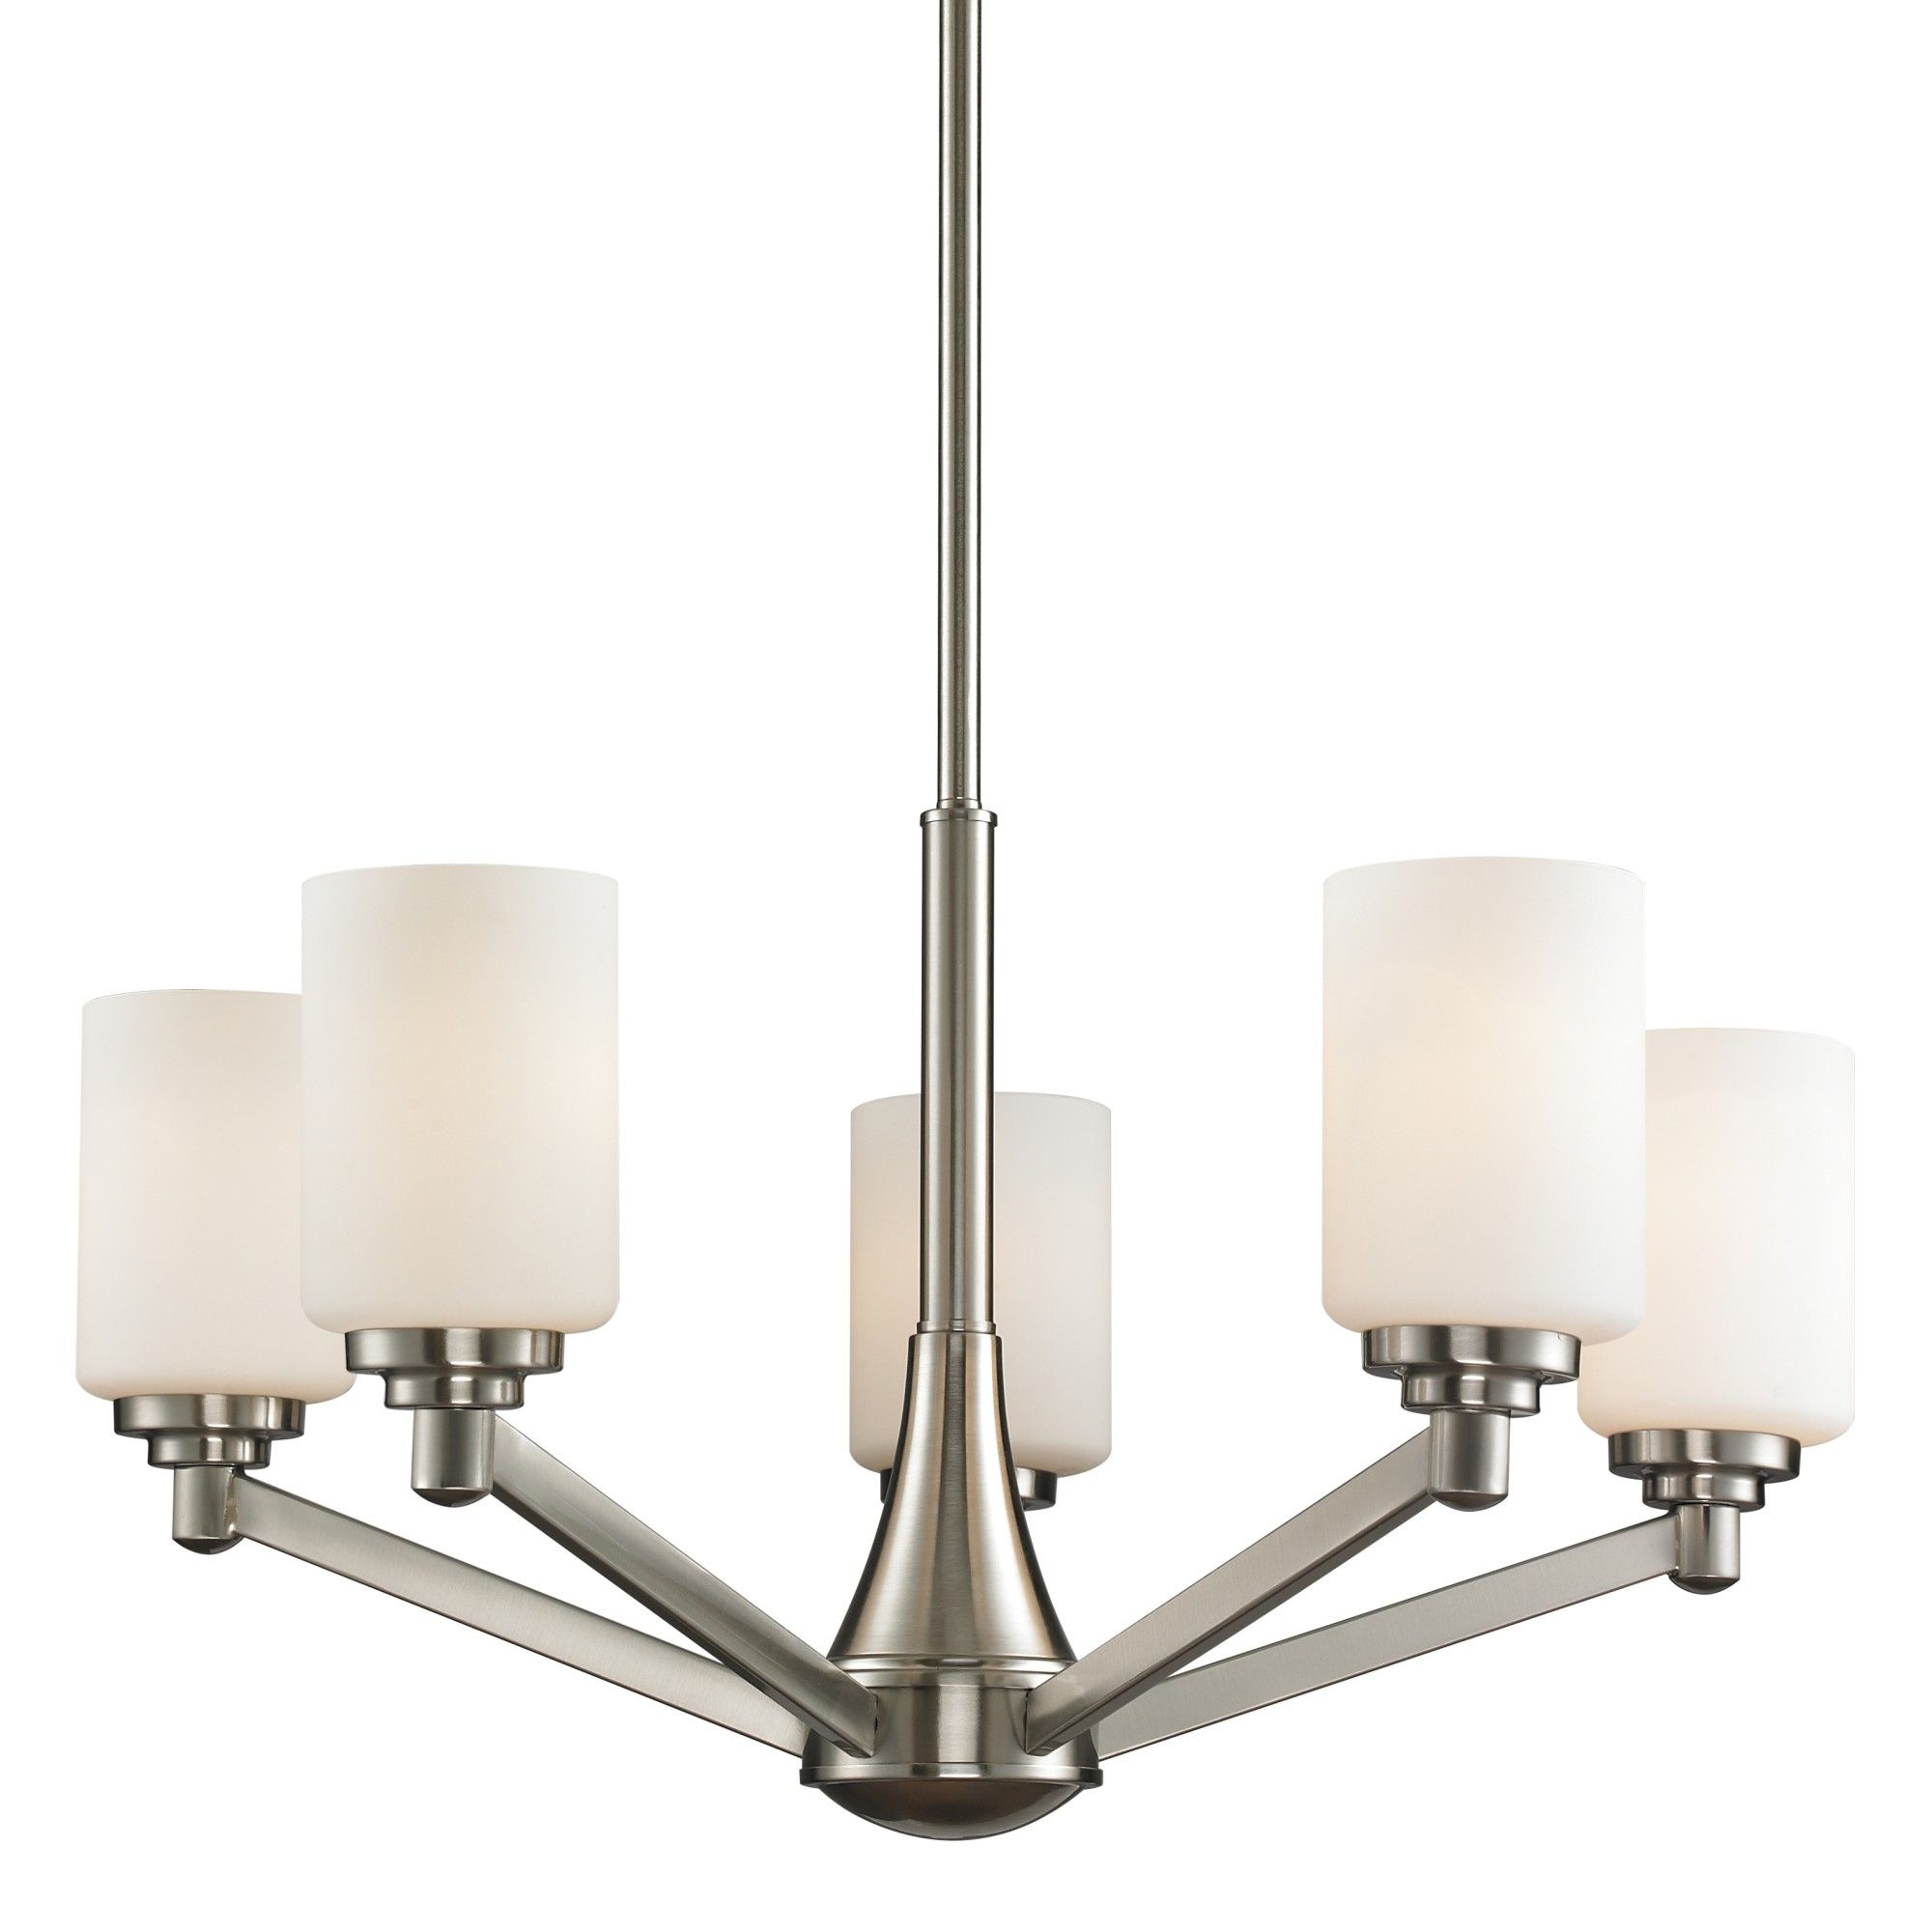 Fashionable Satin Nickel Five Light Single Tier Chandeliers Intended For Z Lite 410 5 Nickel Montego 5 Light 1 Tier Chandelier With (View 18 of 20)